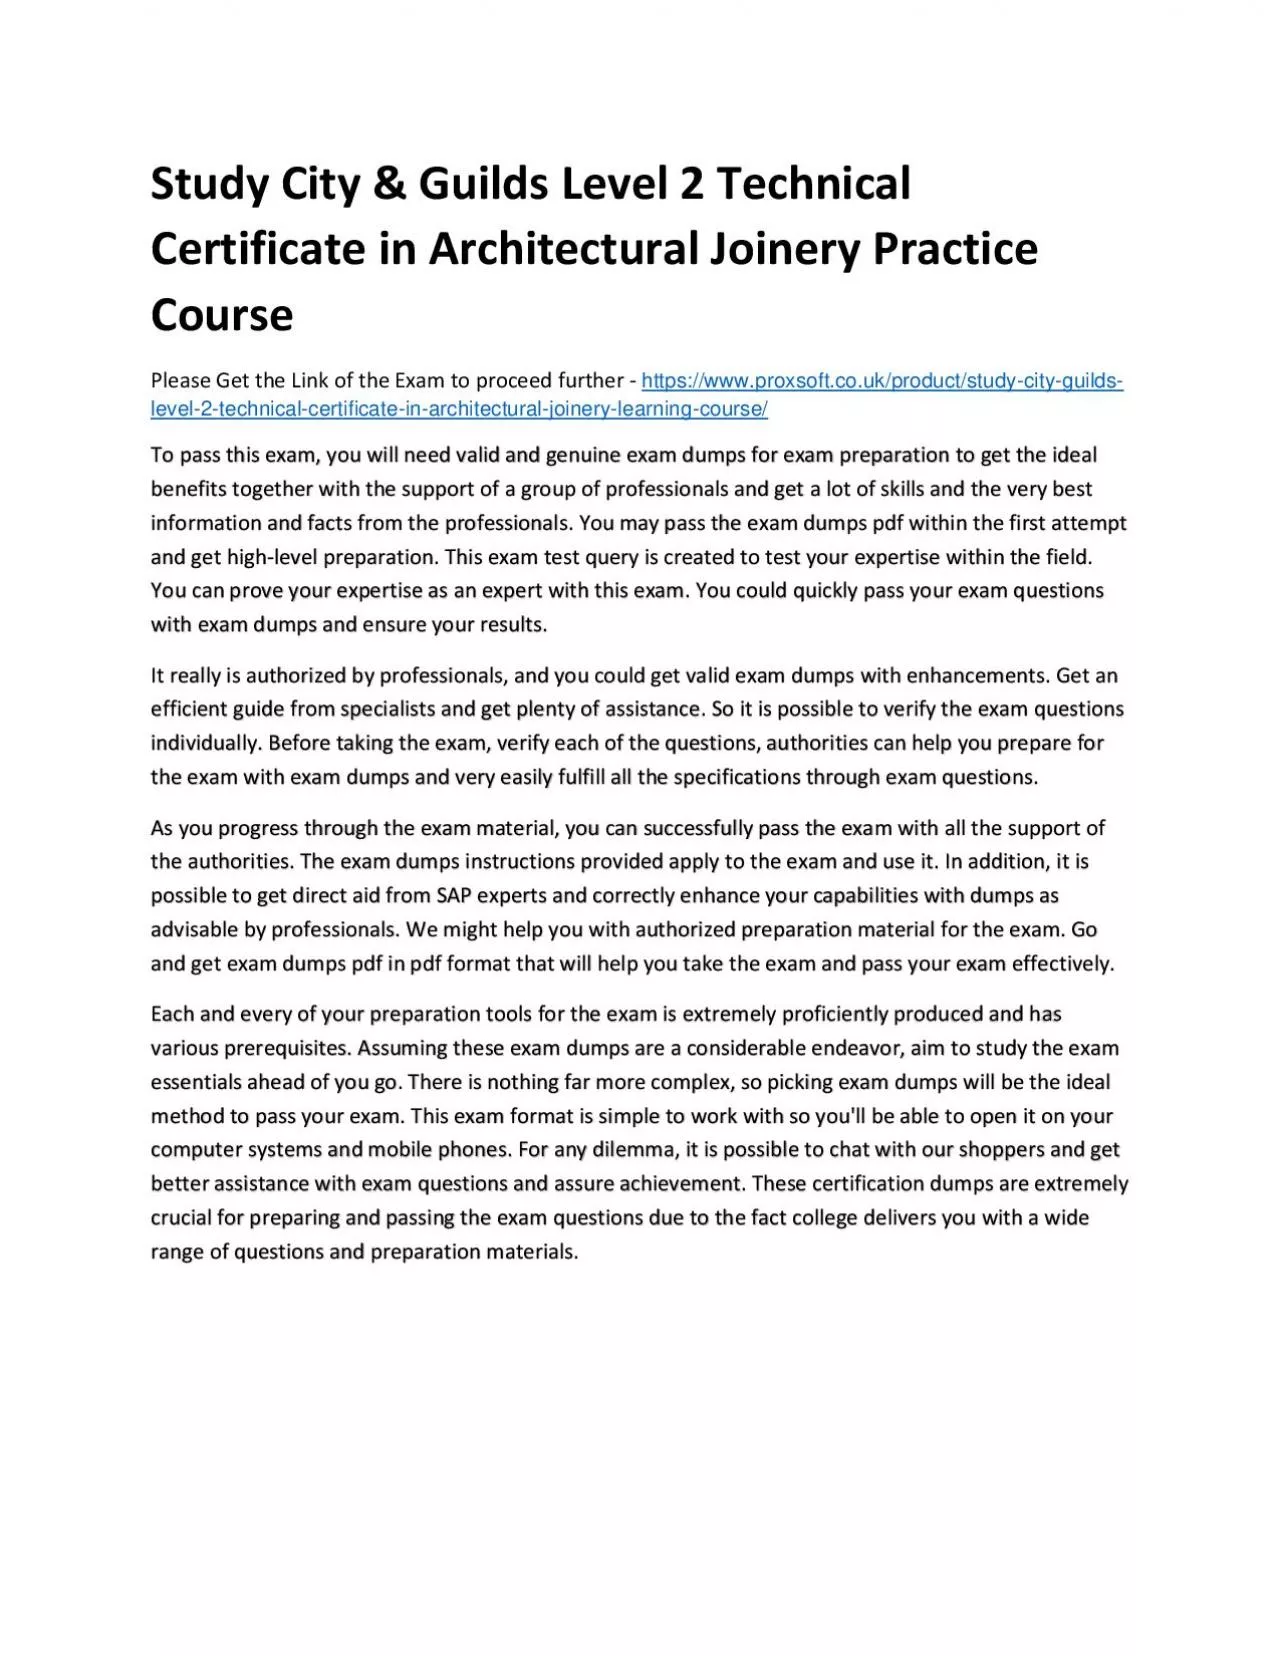 Study City & Guilds Level 2 Technical Certificate in Architectural Joinery Practice Course